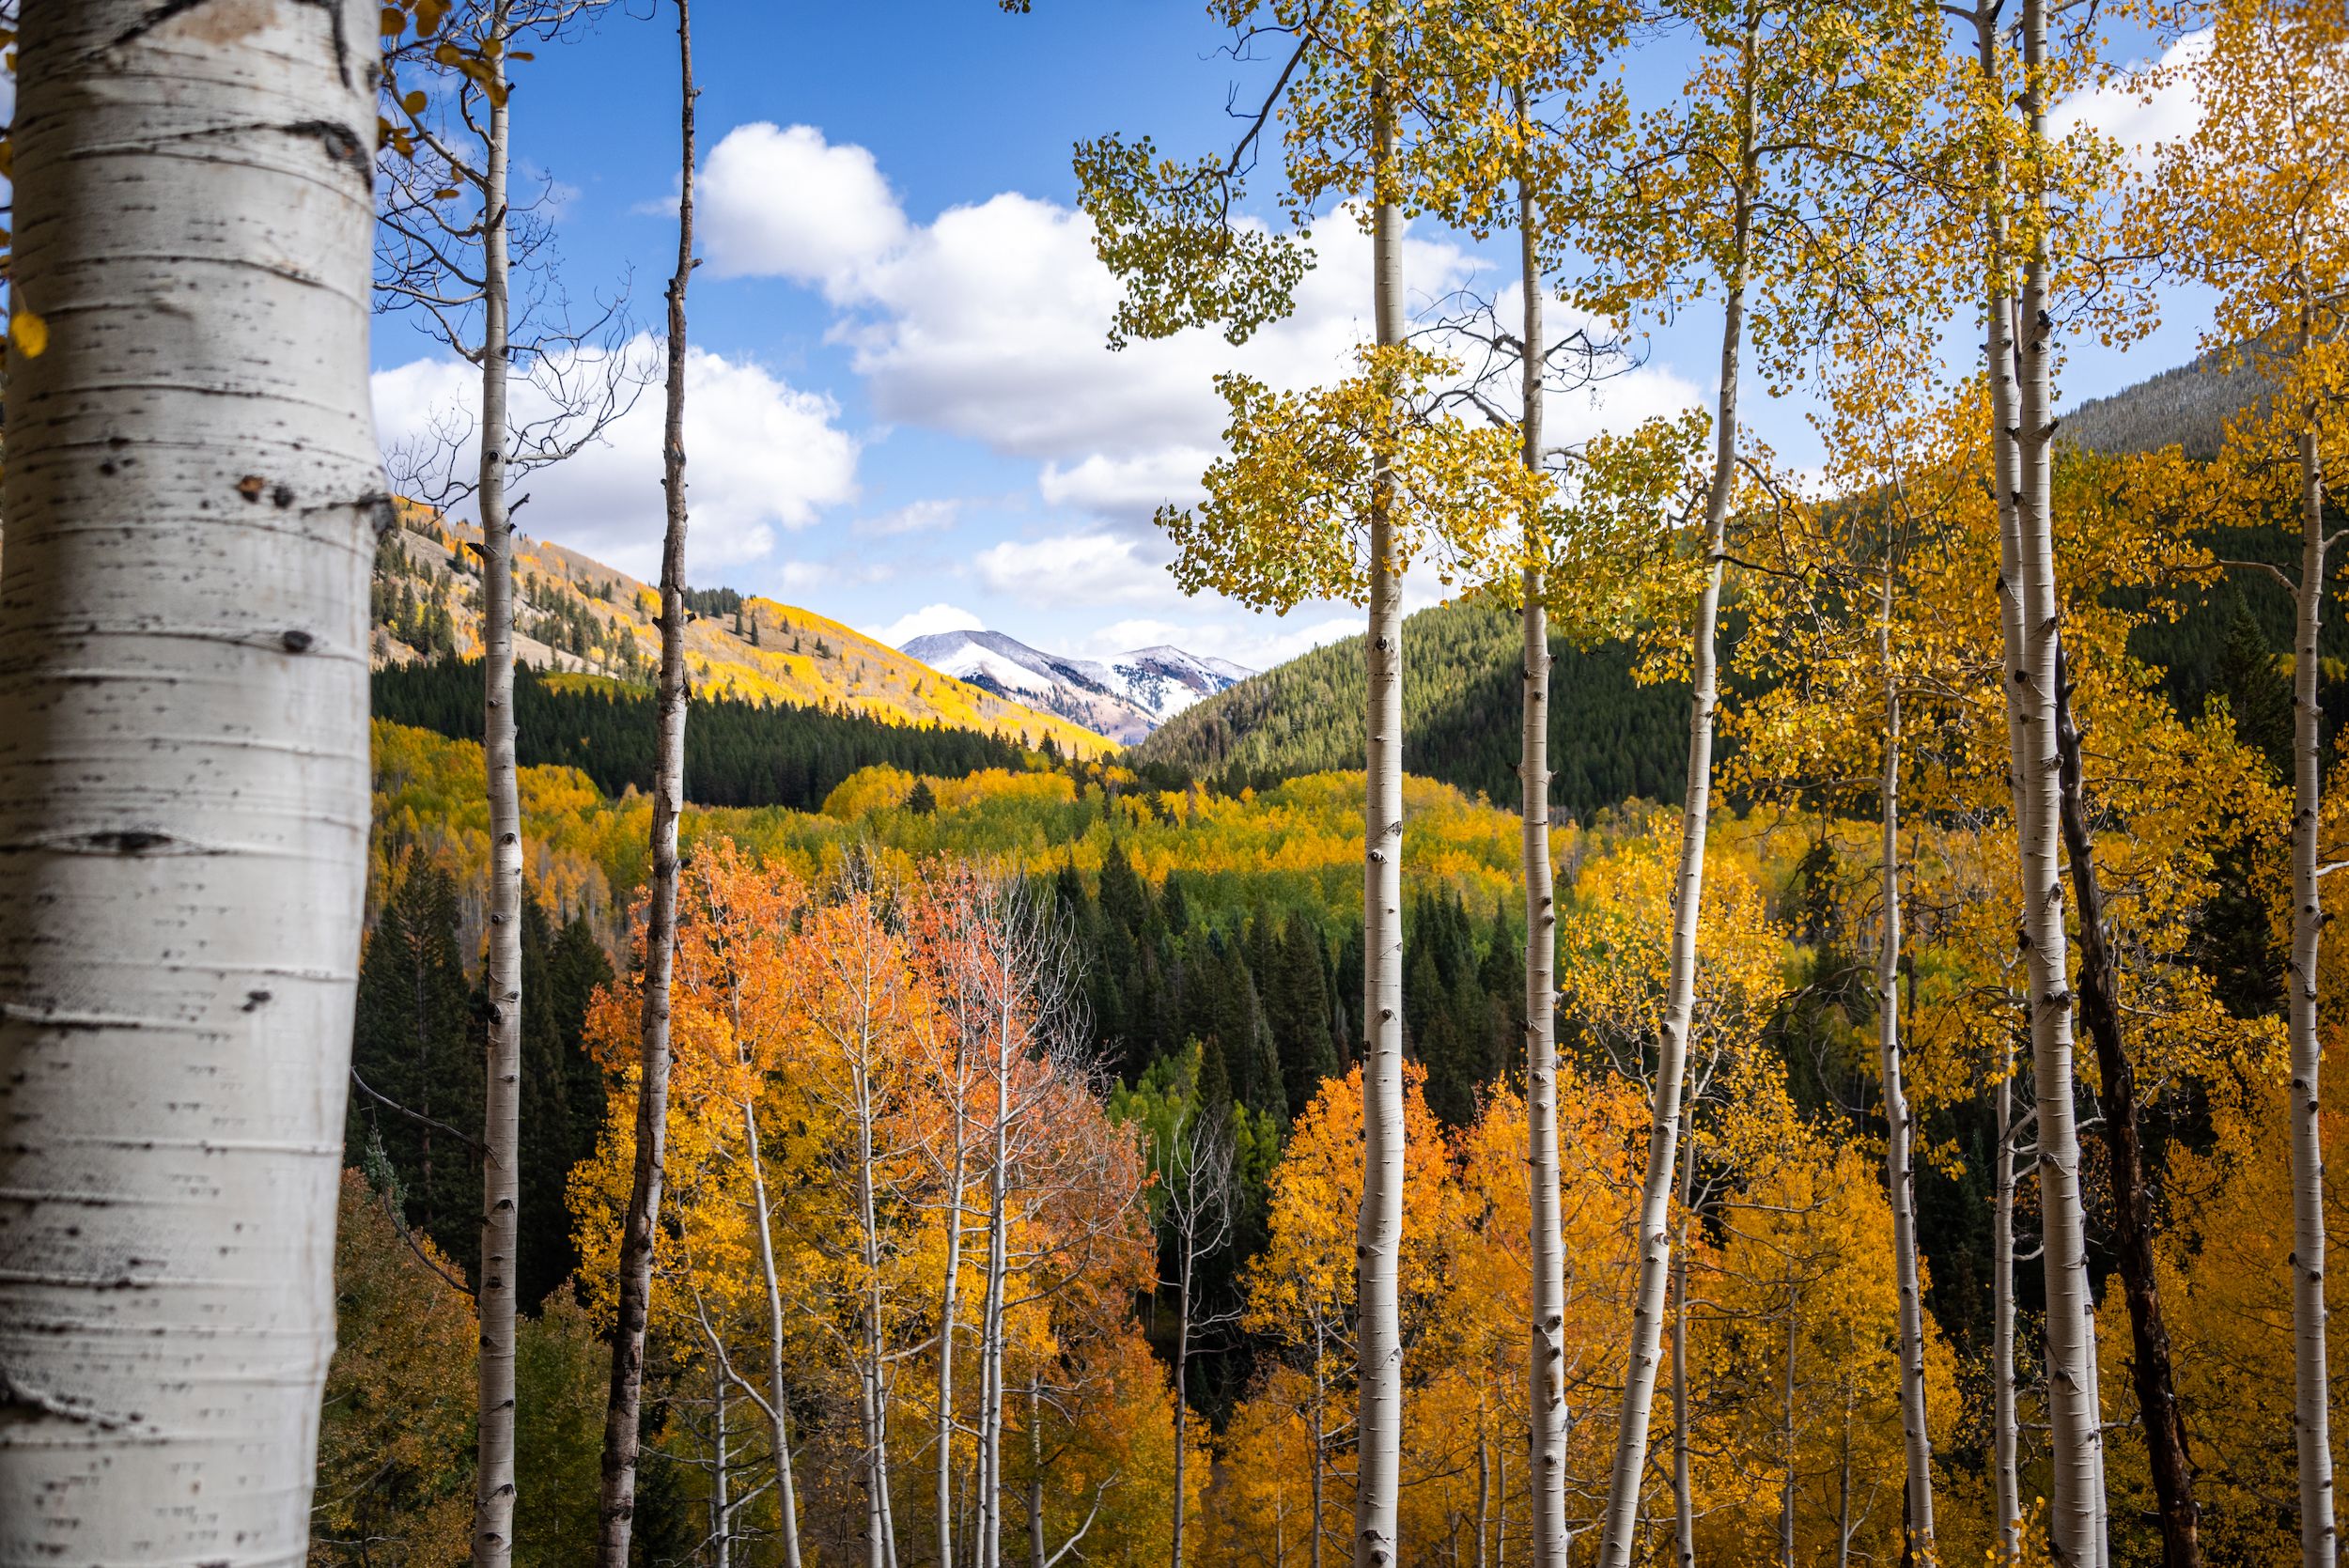 A sweeping scene of hillsides covered in trees with leaves that have changed to fall colors